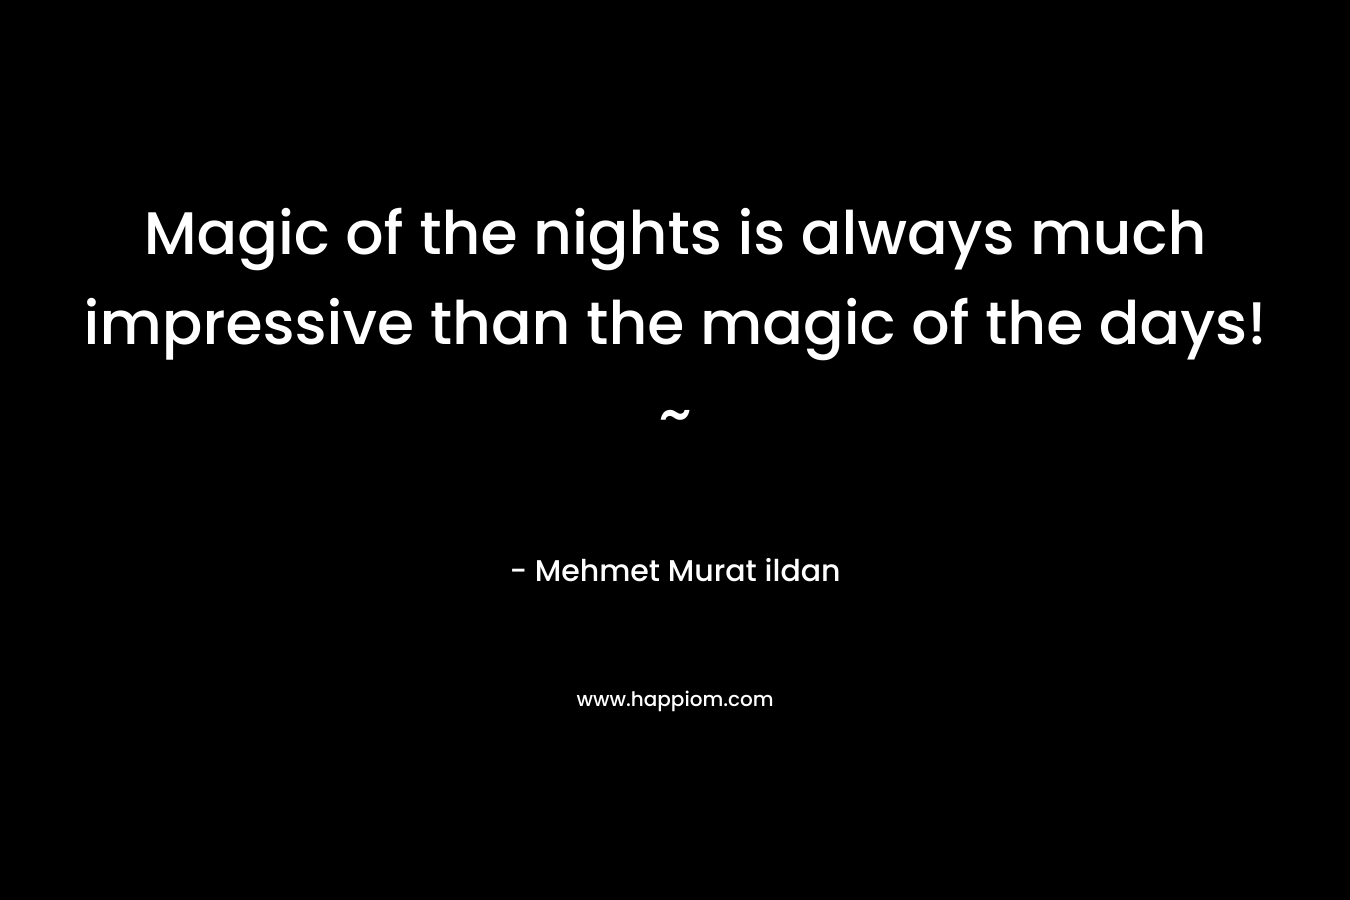 Magic of the nights is always much impressive than the magic of the days! ~